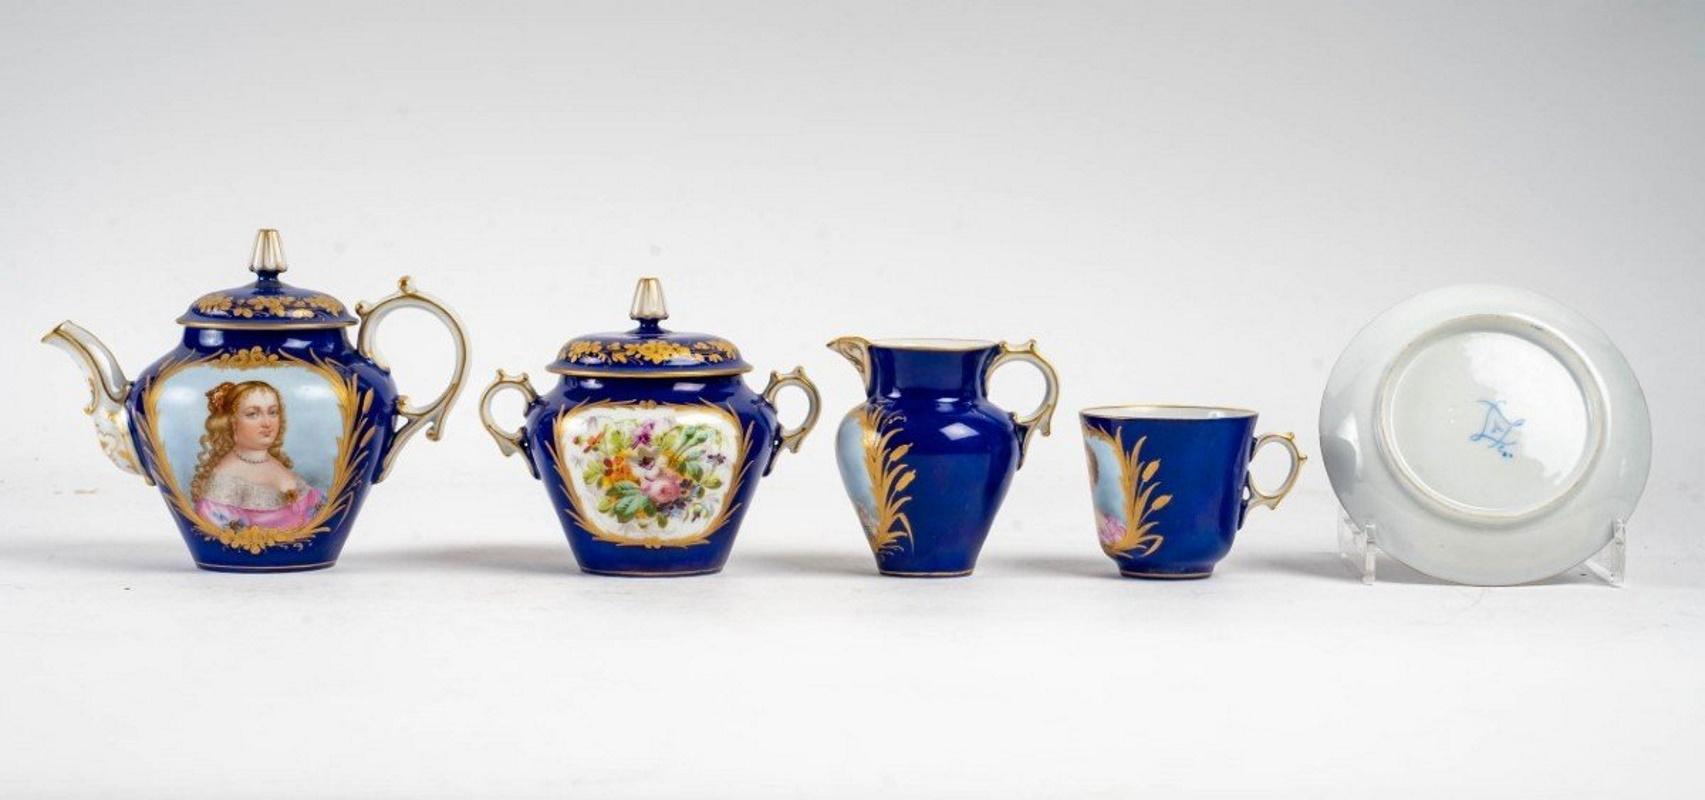 Tea and coffee service in blue porcelain Signed Sèvres XIXth century including a coffee or tea pot (Height: 14 cm), a sugar bowl (Height: 12 cm), a milk jug (Height: 9 cm), two cups and their saucers, the service rests on a beautiful tray (36X36